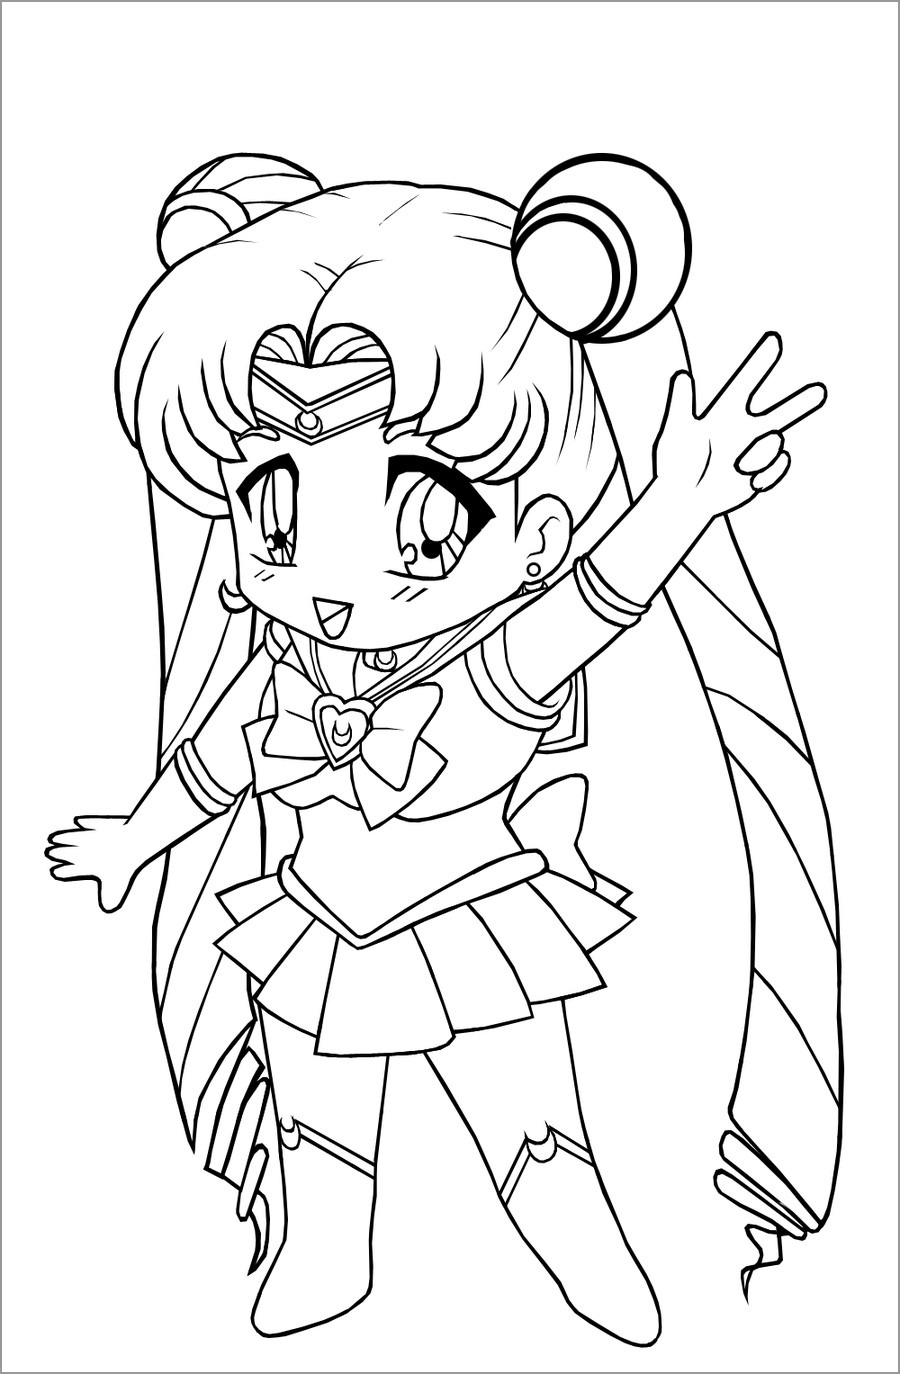 Chibi Sailormoon Coloring Pages